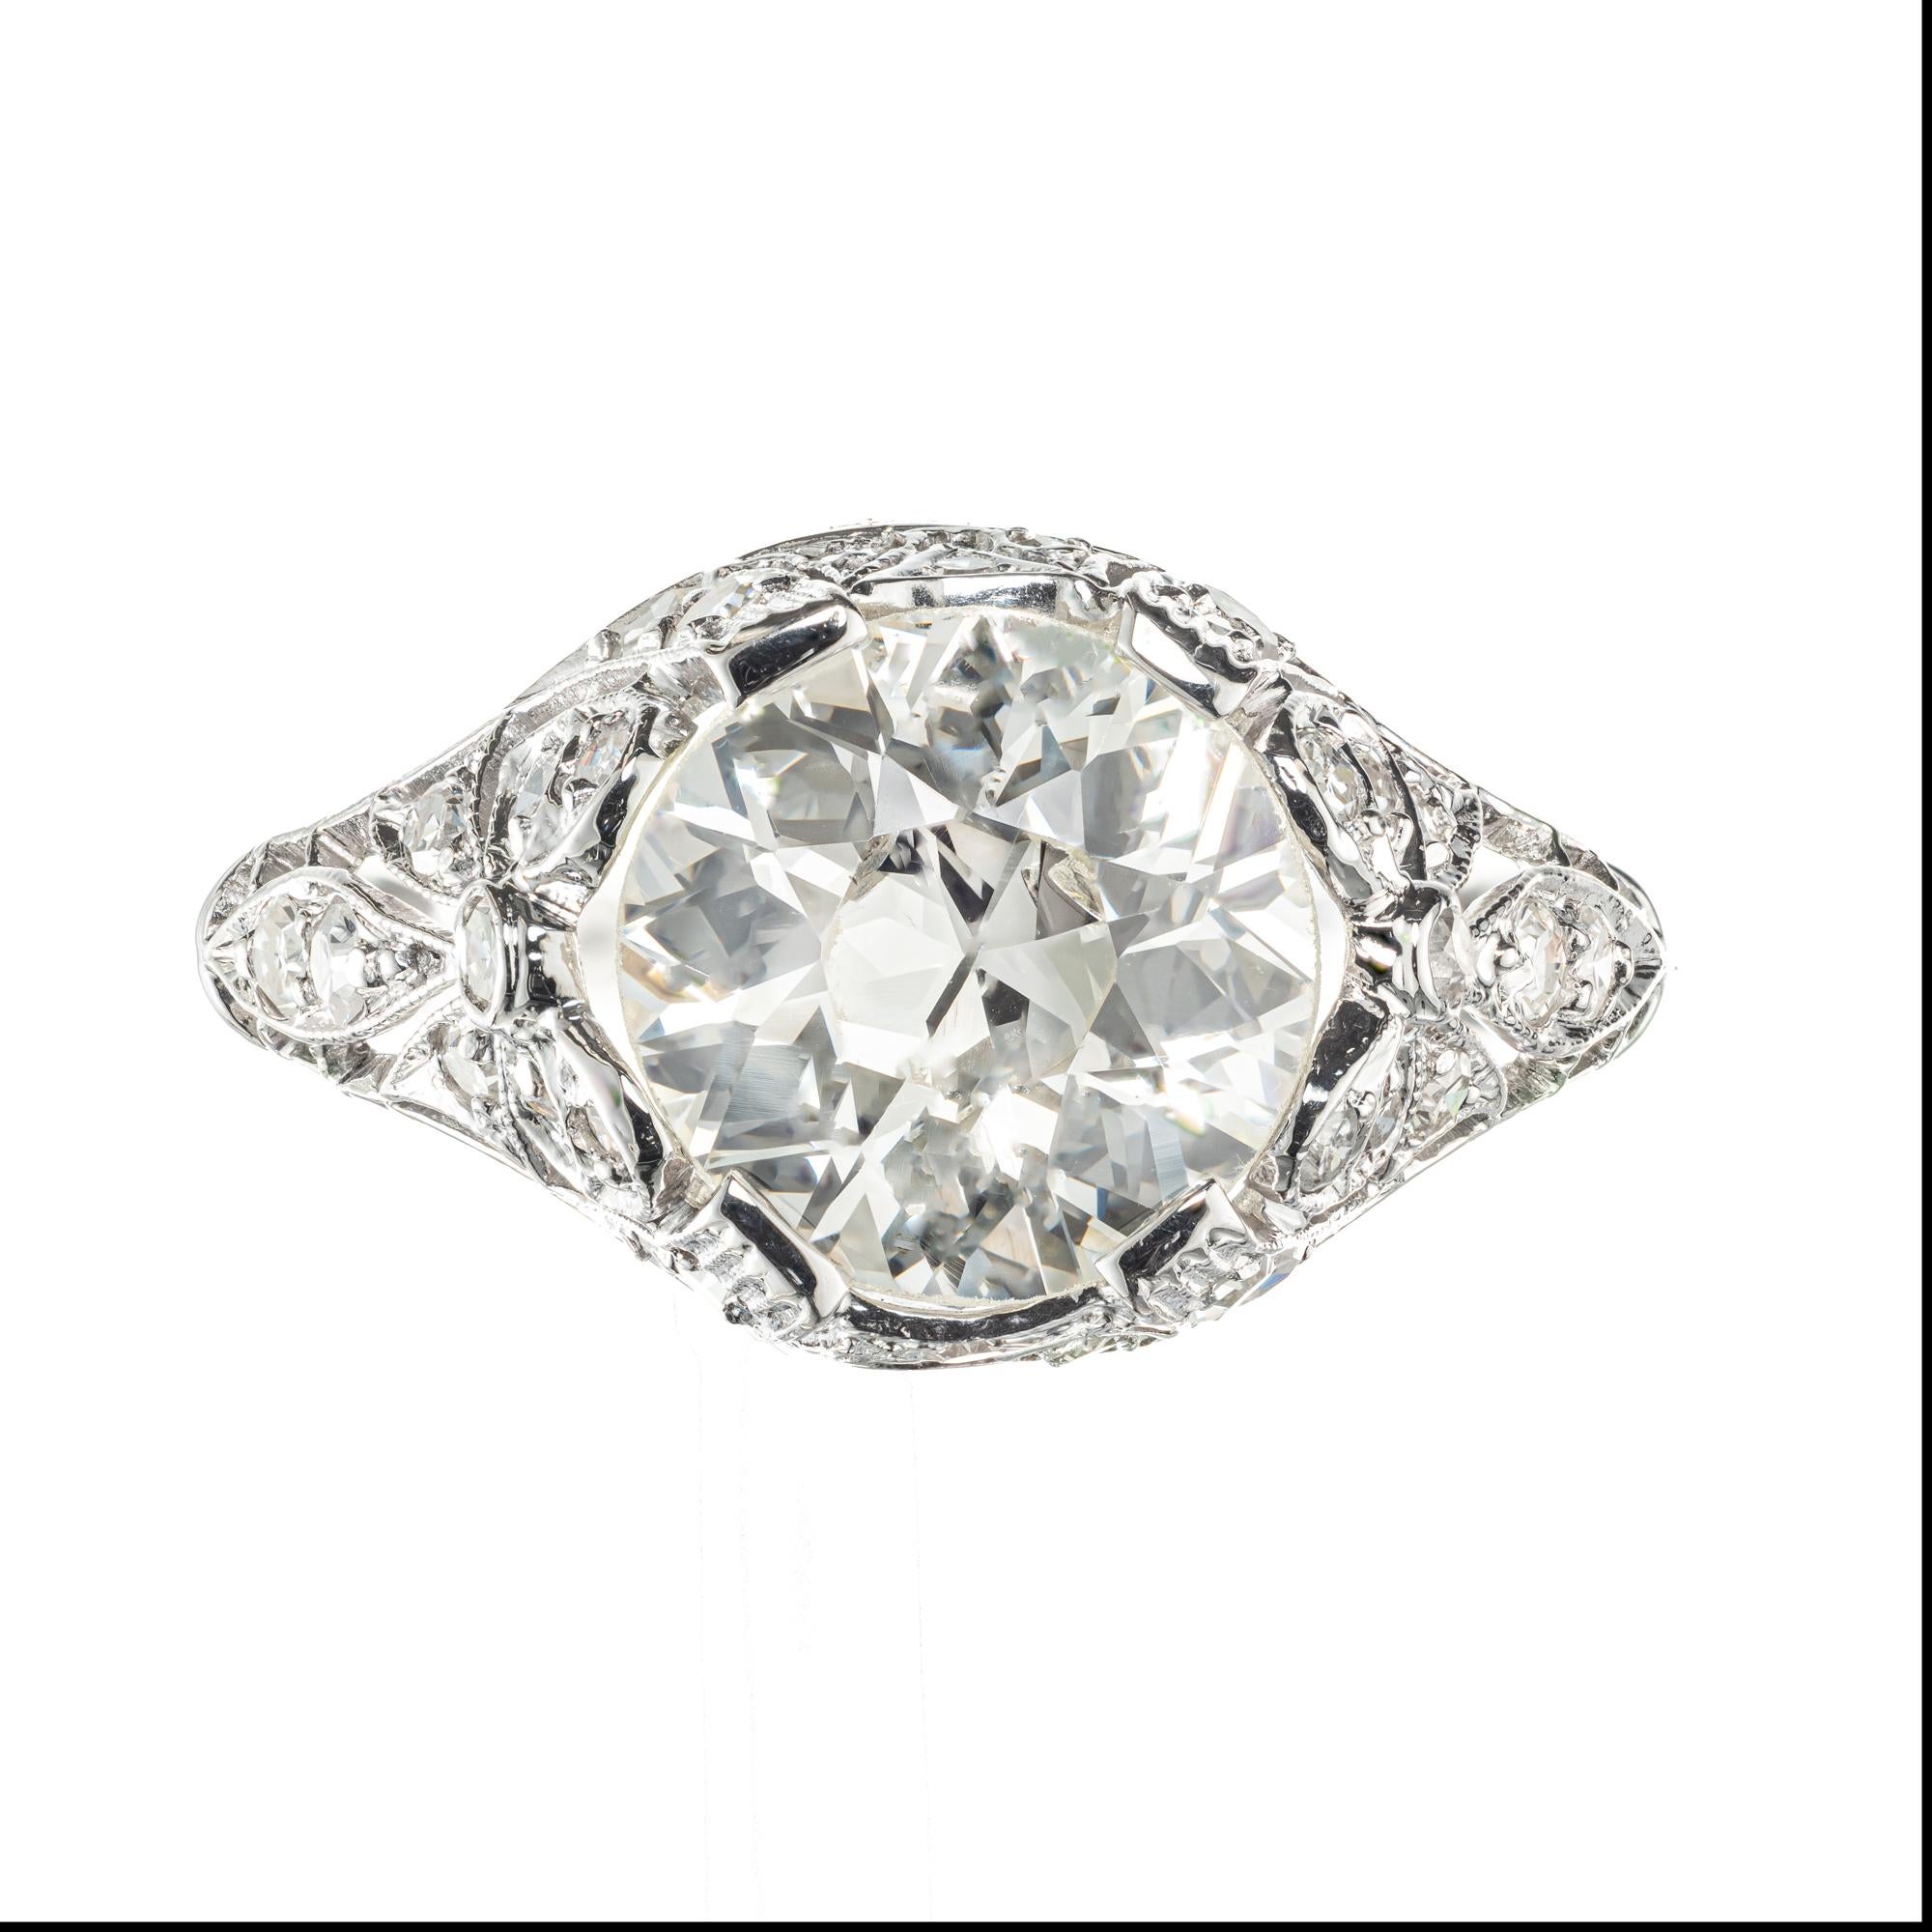 The old mine brilliant cut diamond engagement ring. Circa 1900’s old European center diamond accented with 32 single cut diamond in a platinum setting with bow design sides. EGL certified. 

1 old European brilliant cut diamonds, approx. 2.48cts I-J